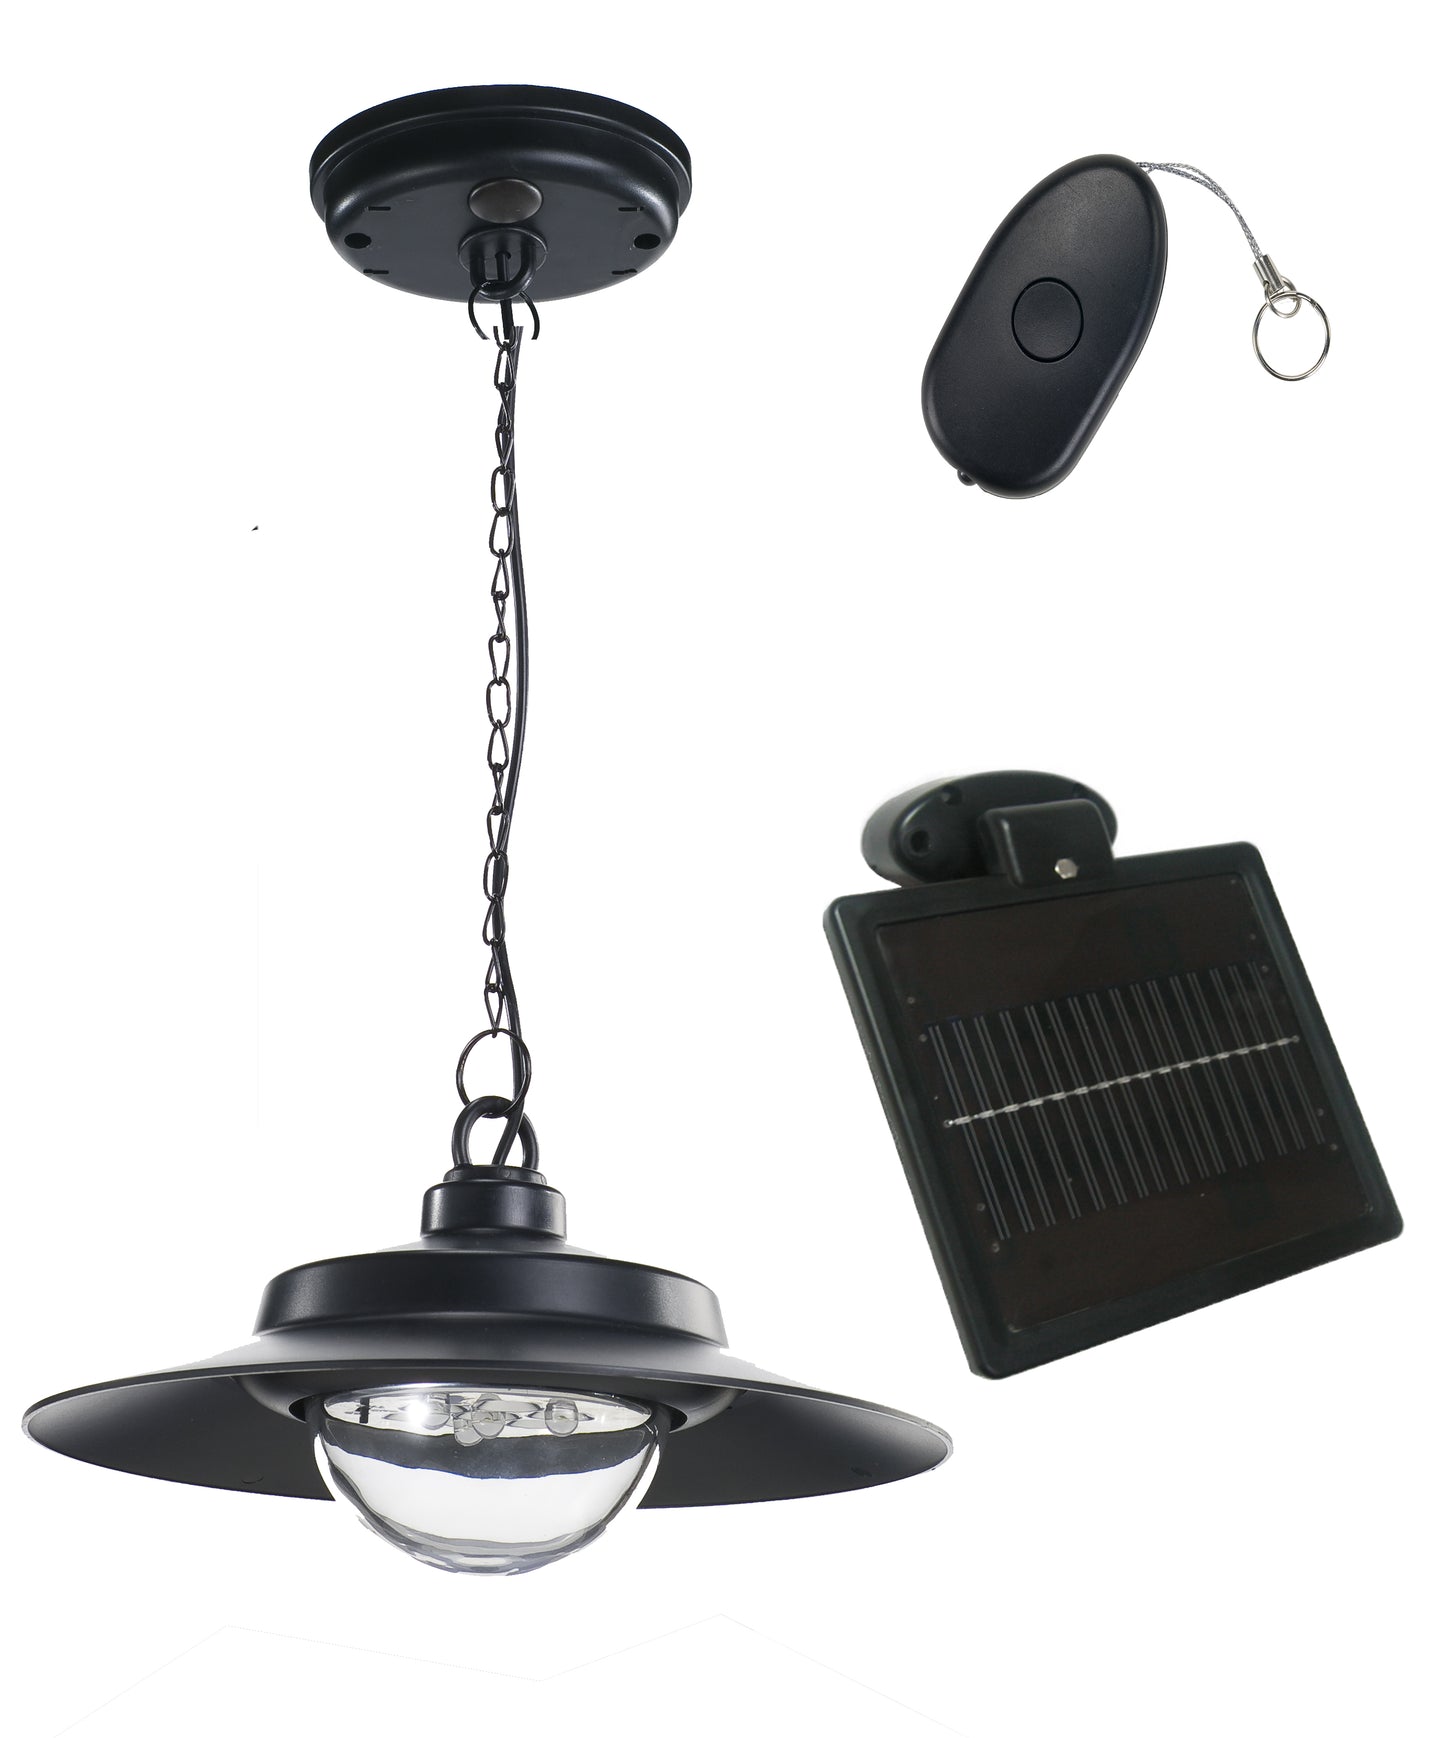 Nature Power Hanging Solar Powered LED Shed Light with Remote Control, Black Finish, 250 Lumens - Ecowareness